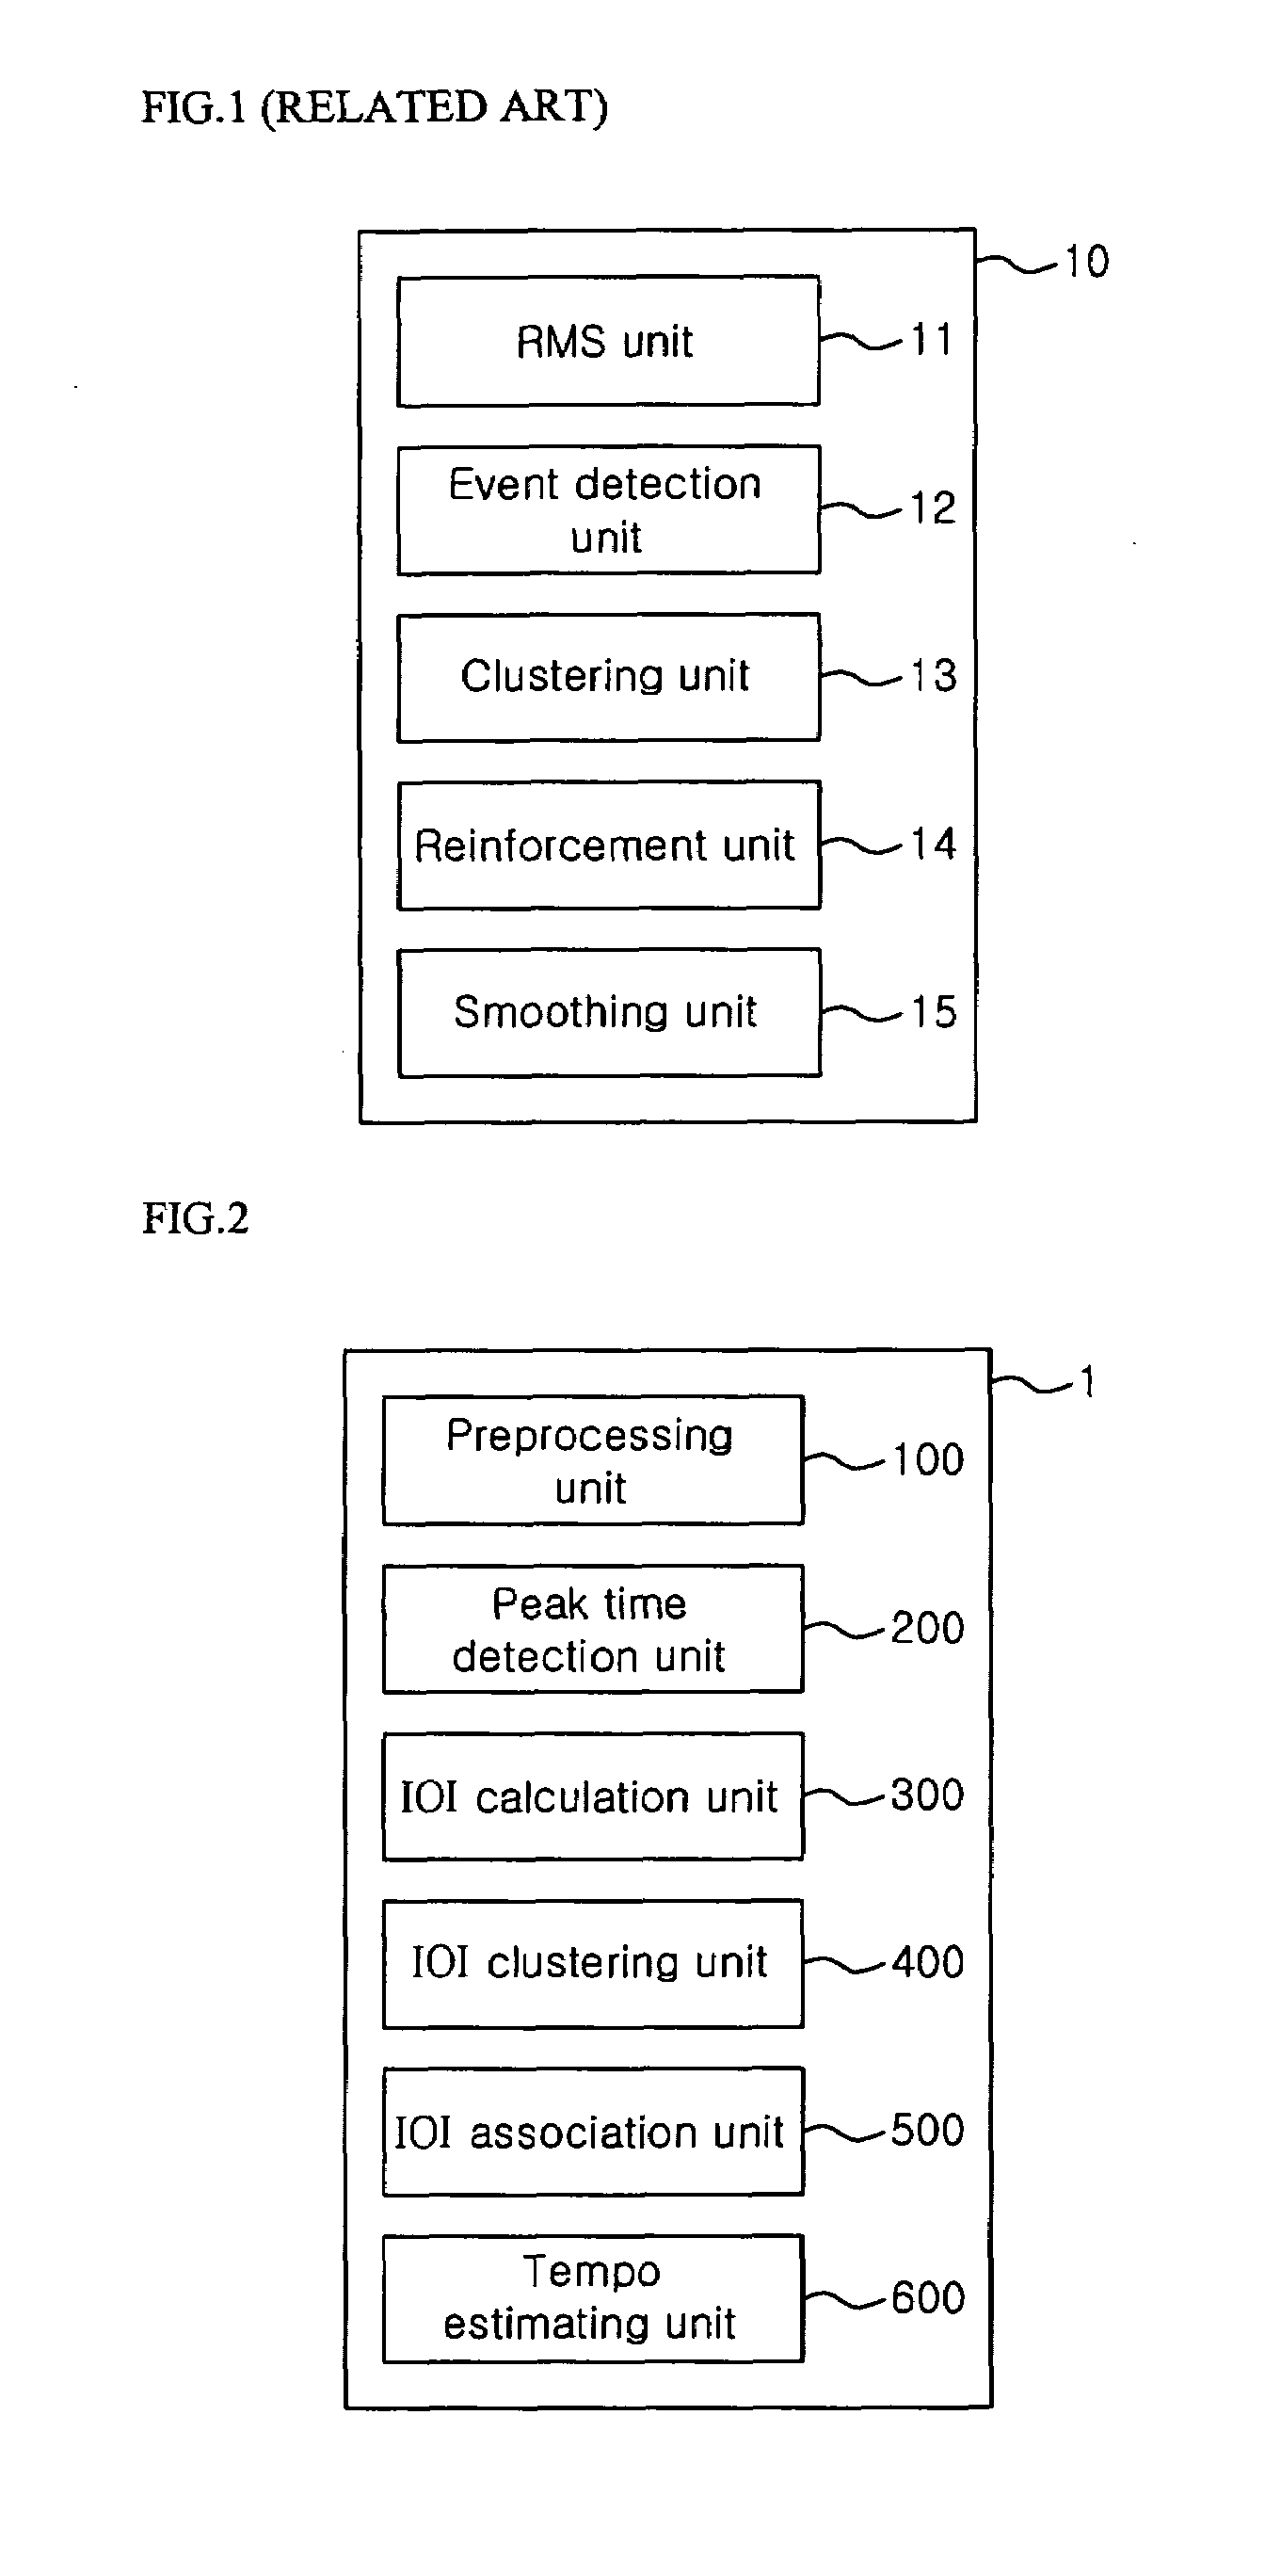 Method and apparatus for estimating tempo based on inter-onset interval count